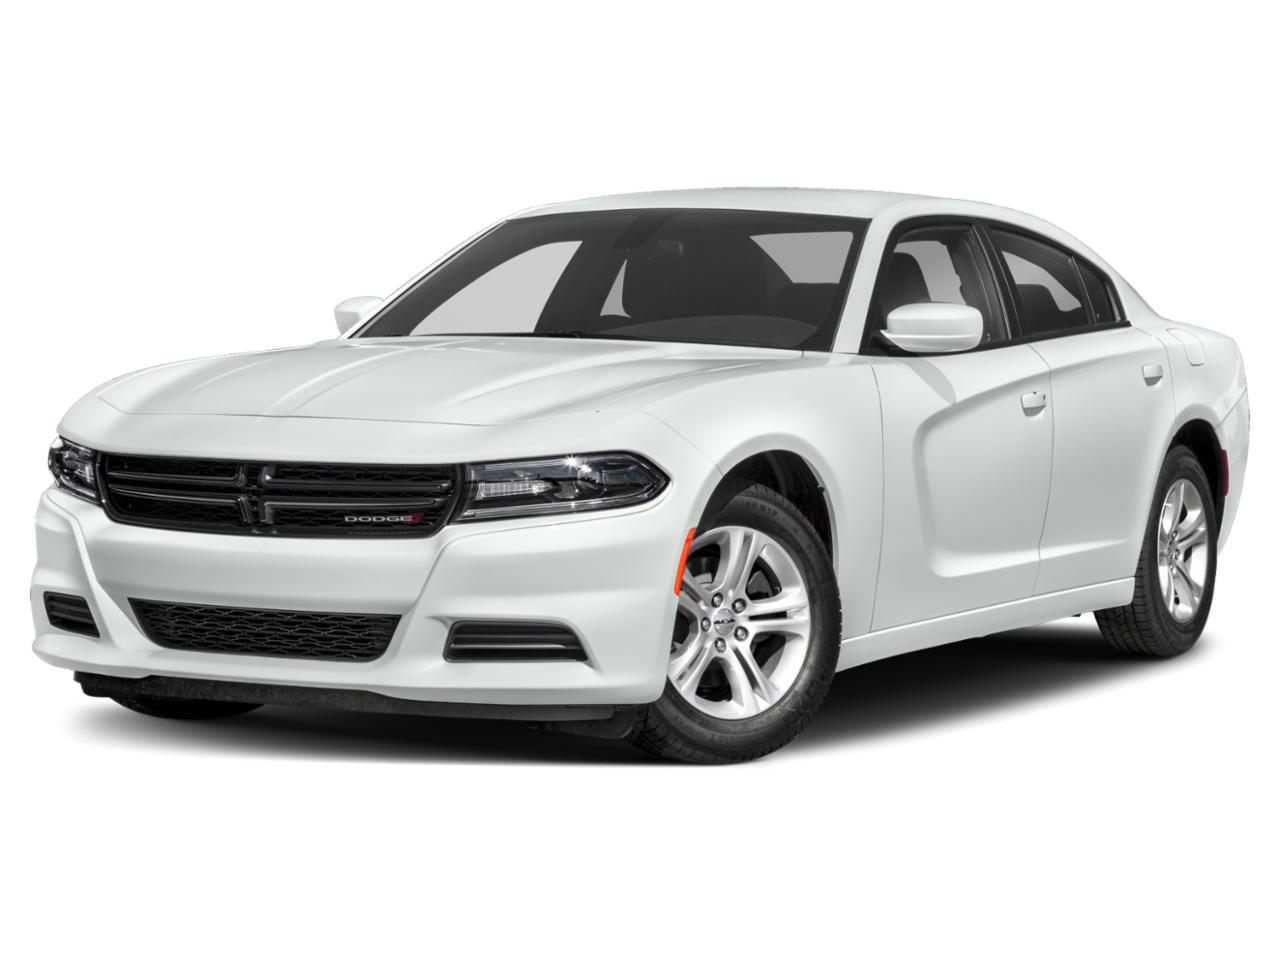 Used Dodge Charger Pearland Tx